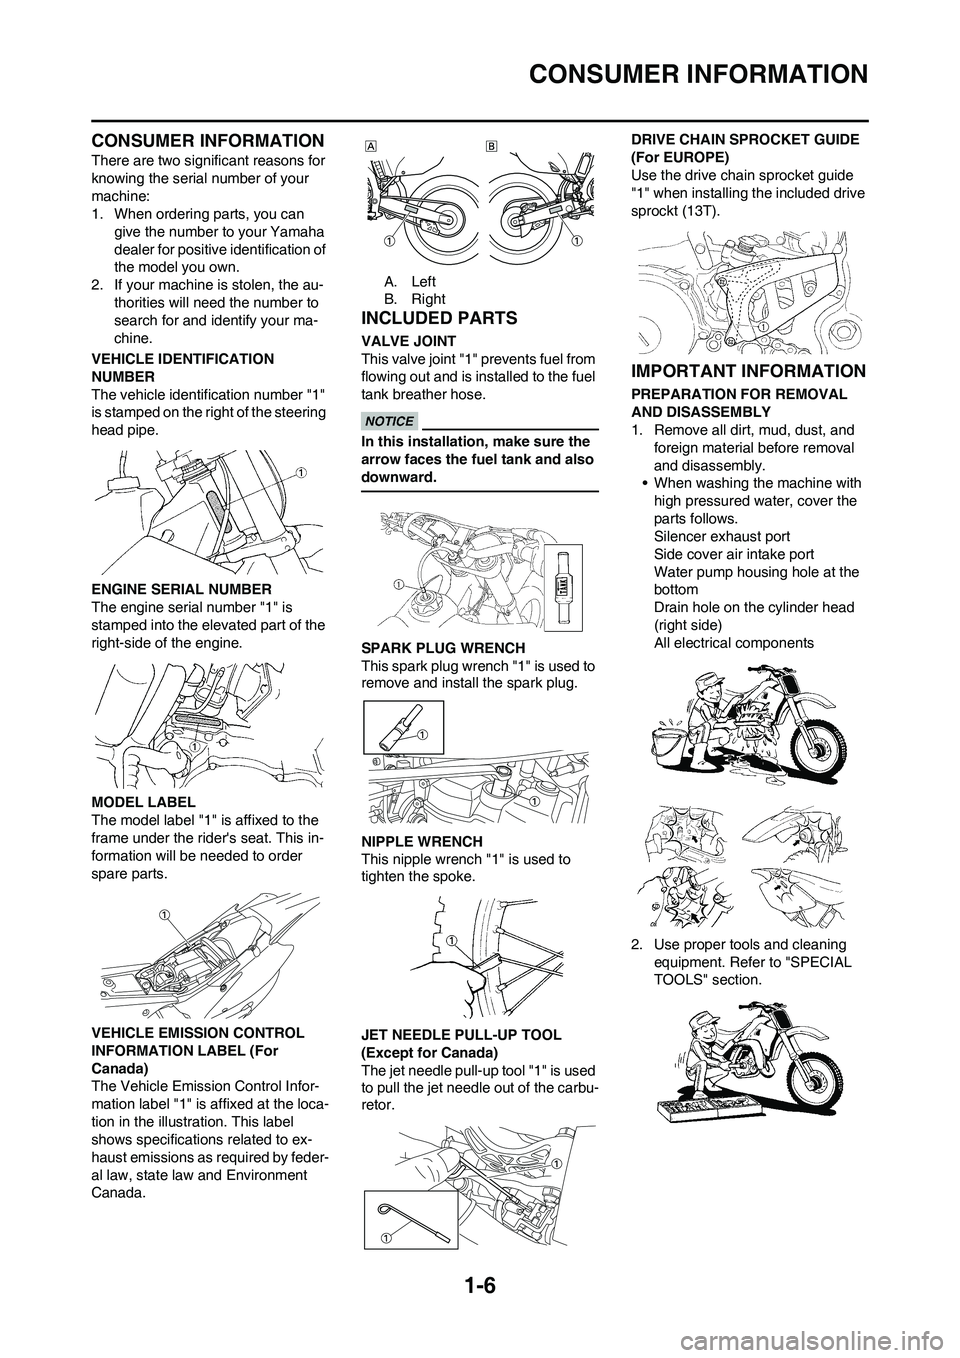 YAMAHA WR 450F 2010  Owners Manual 
1-6
CONSUMER INFORMATION
CONSUMER INFORMATION
There are two significant reasons for 
knowing the serial number of your 
machine:
1. When ordering parts, you can give the number to your Yamaha 
dealer